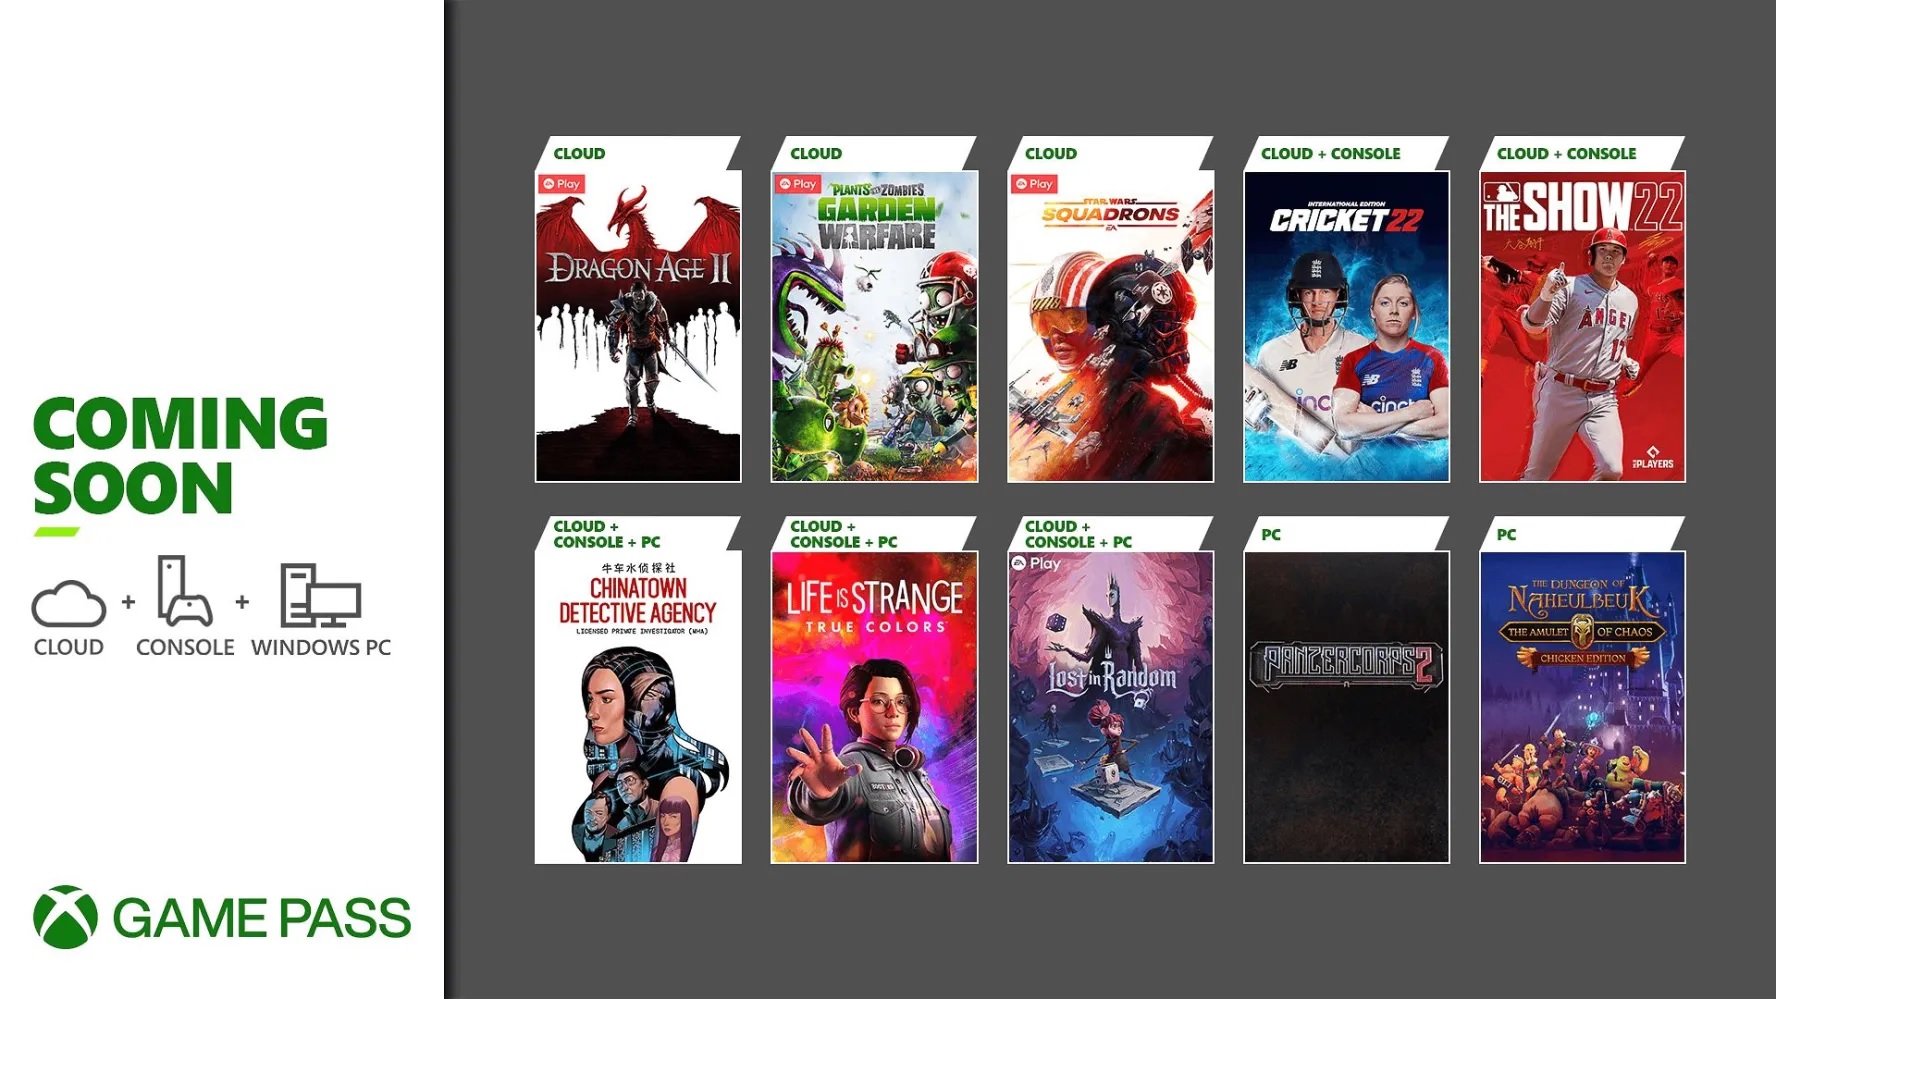 Xbox Owners Can Now Stream Game Pass Games From the Cloud